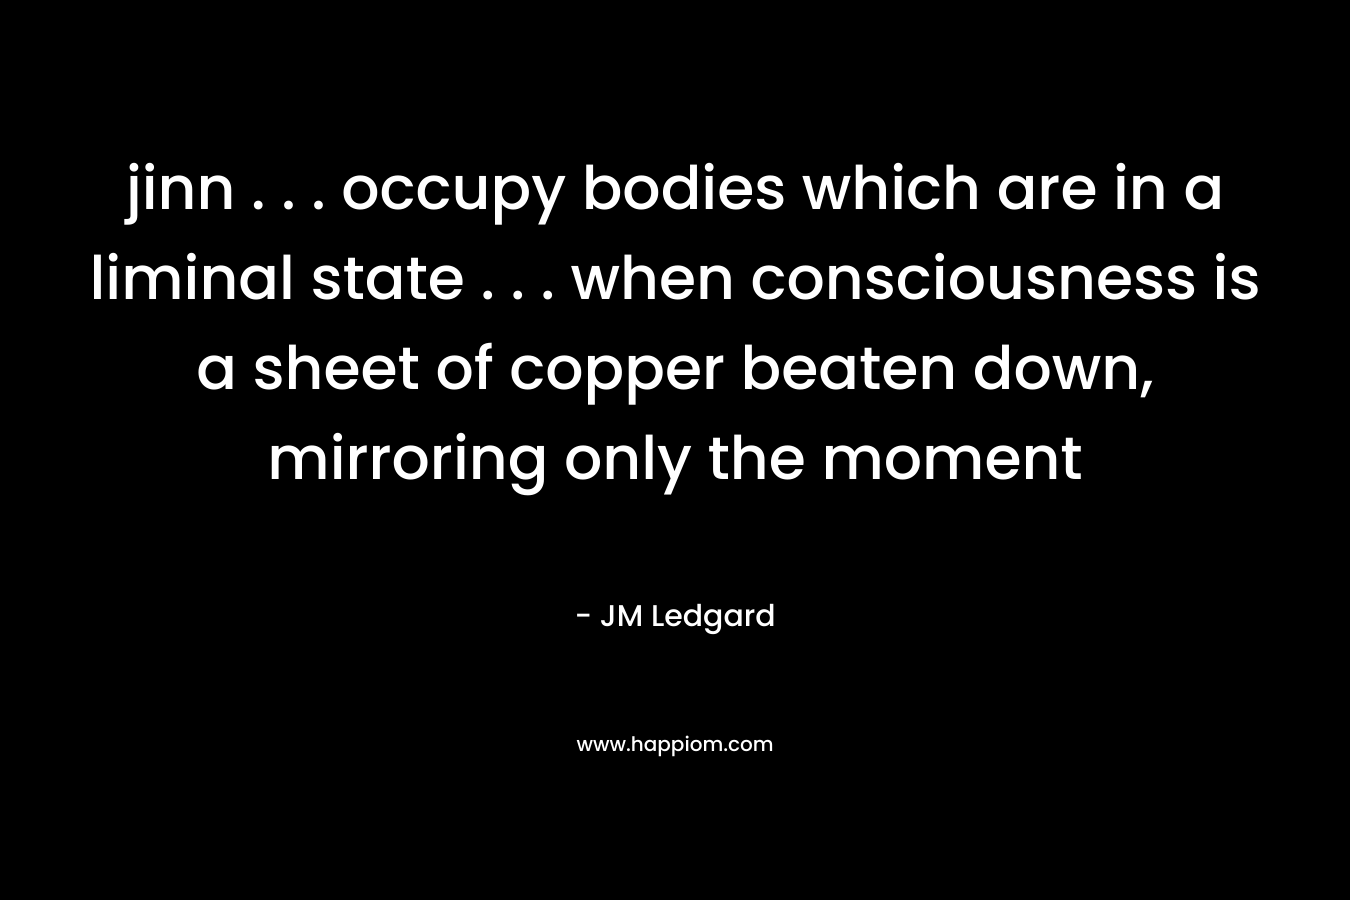 jinn . . . occupy bodies which are in a liminal state . . . when consciousness is a sheet of copper beaten down, mirroring only the moment – JM Ledgard